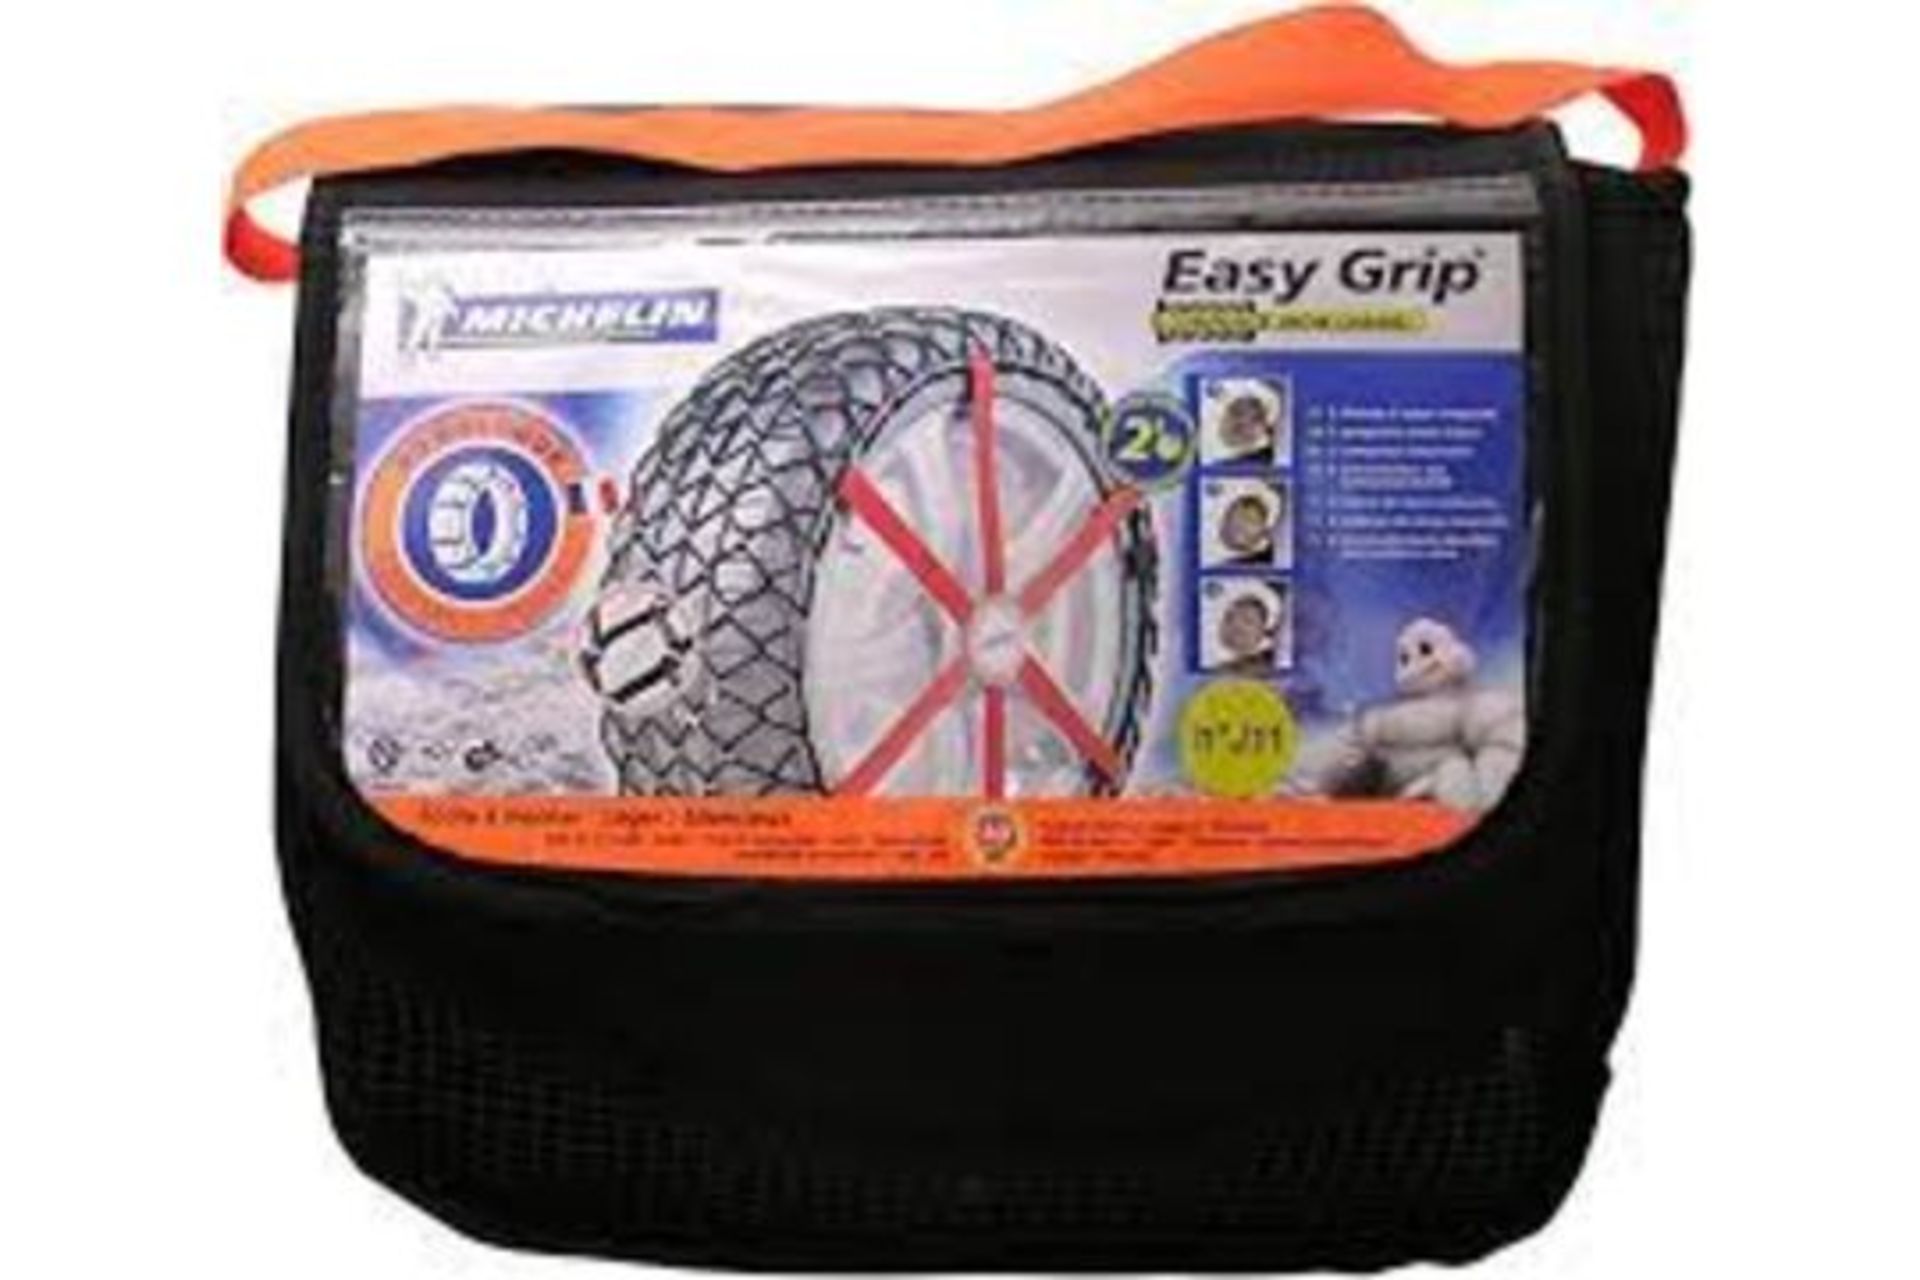 5 X NEW PACKAGED SETS OF Michelin Snow Sock Easy Grip G12. RRP £77.95 EACH. The Michelin Easy Grip